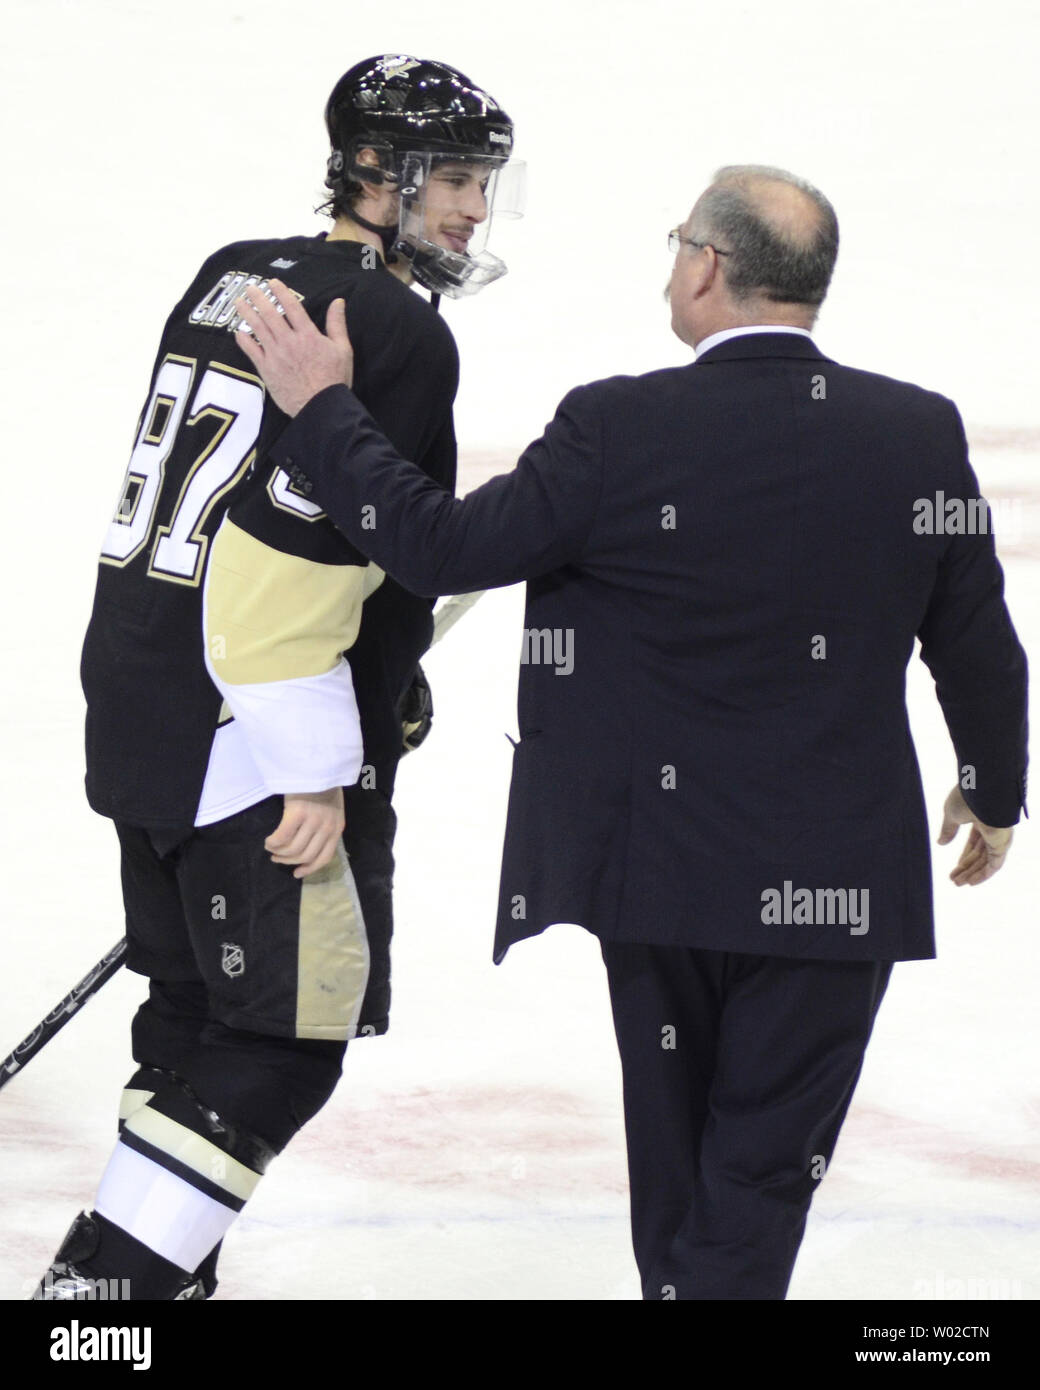 Ottawa Senators Head Coach Paul MacLean congratulates Pittsburgh Penguins center Sidney Crosby (87) following the end of the 6-2 win in game five the of the Eastern Conference Semifinals Playoffs at the Consol Energy Center in Pittsburgh on May 24, 2013.   UPI/Archie Carpenter Stock Photo